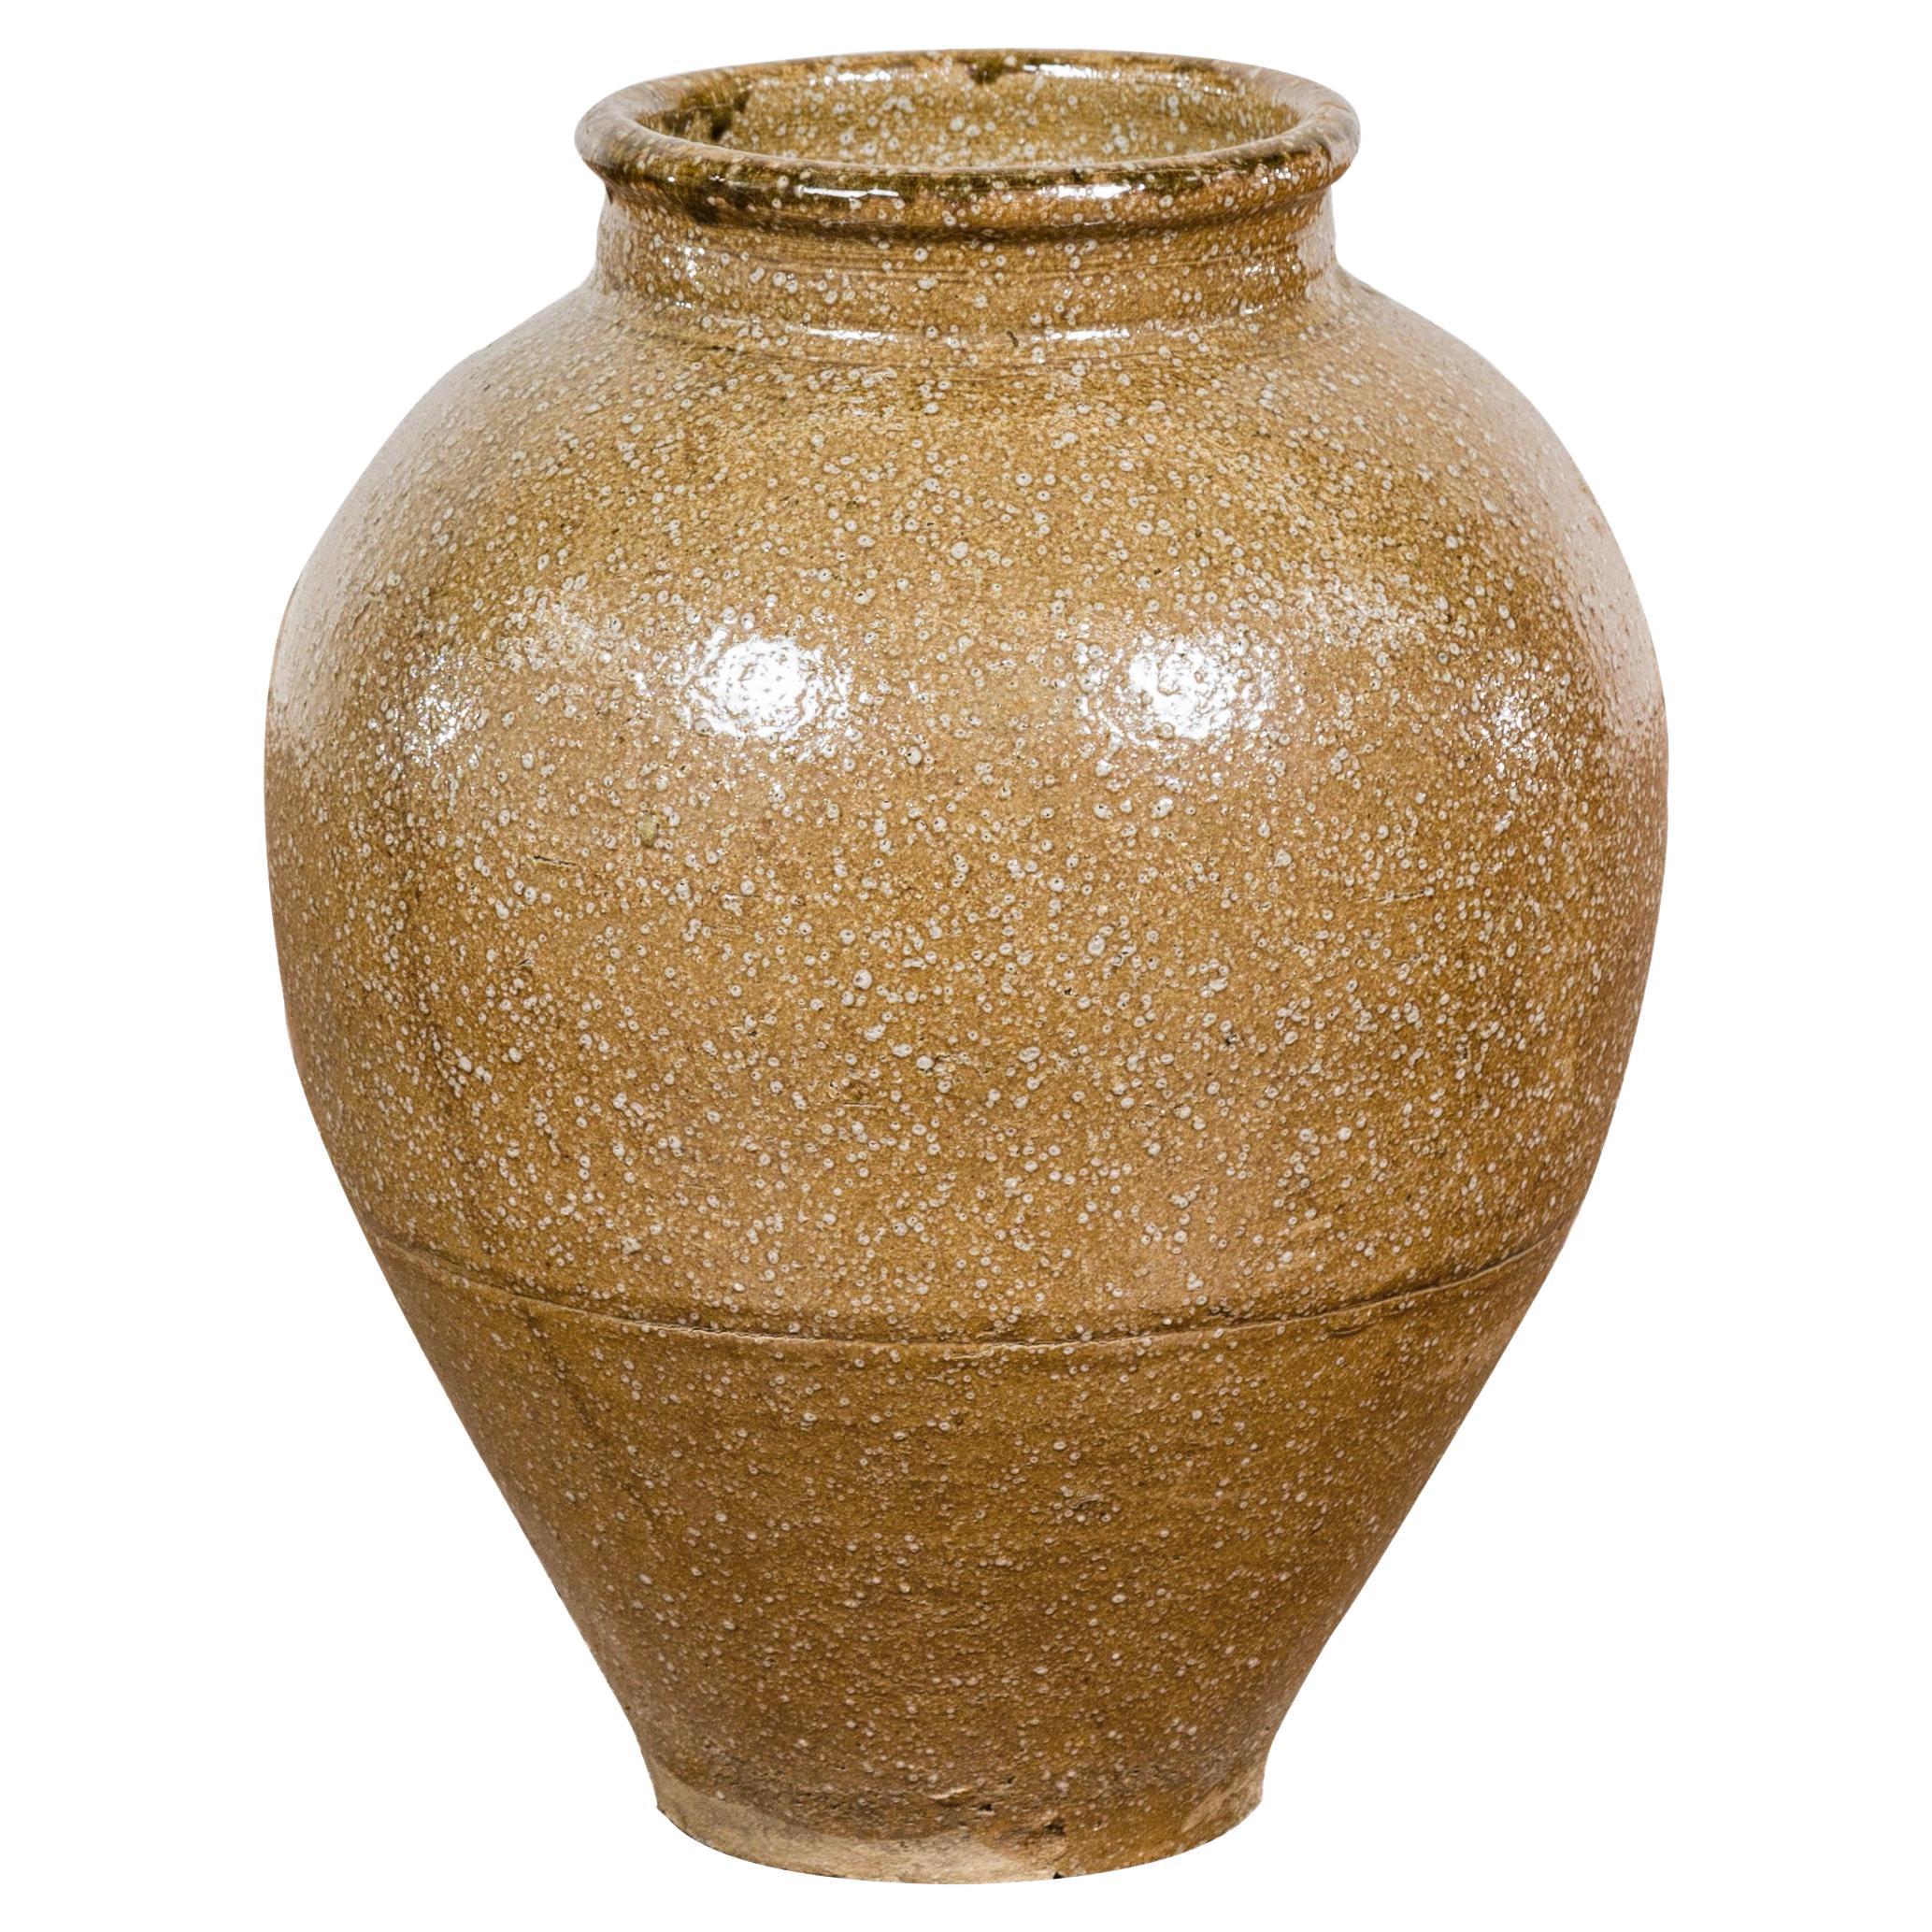 Japanese Taishō Period Two-Tone Sand Glaze Vase with Textured Finish, circa 1900 For Sale